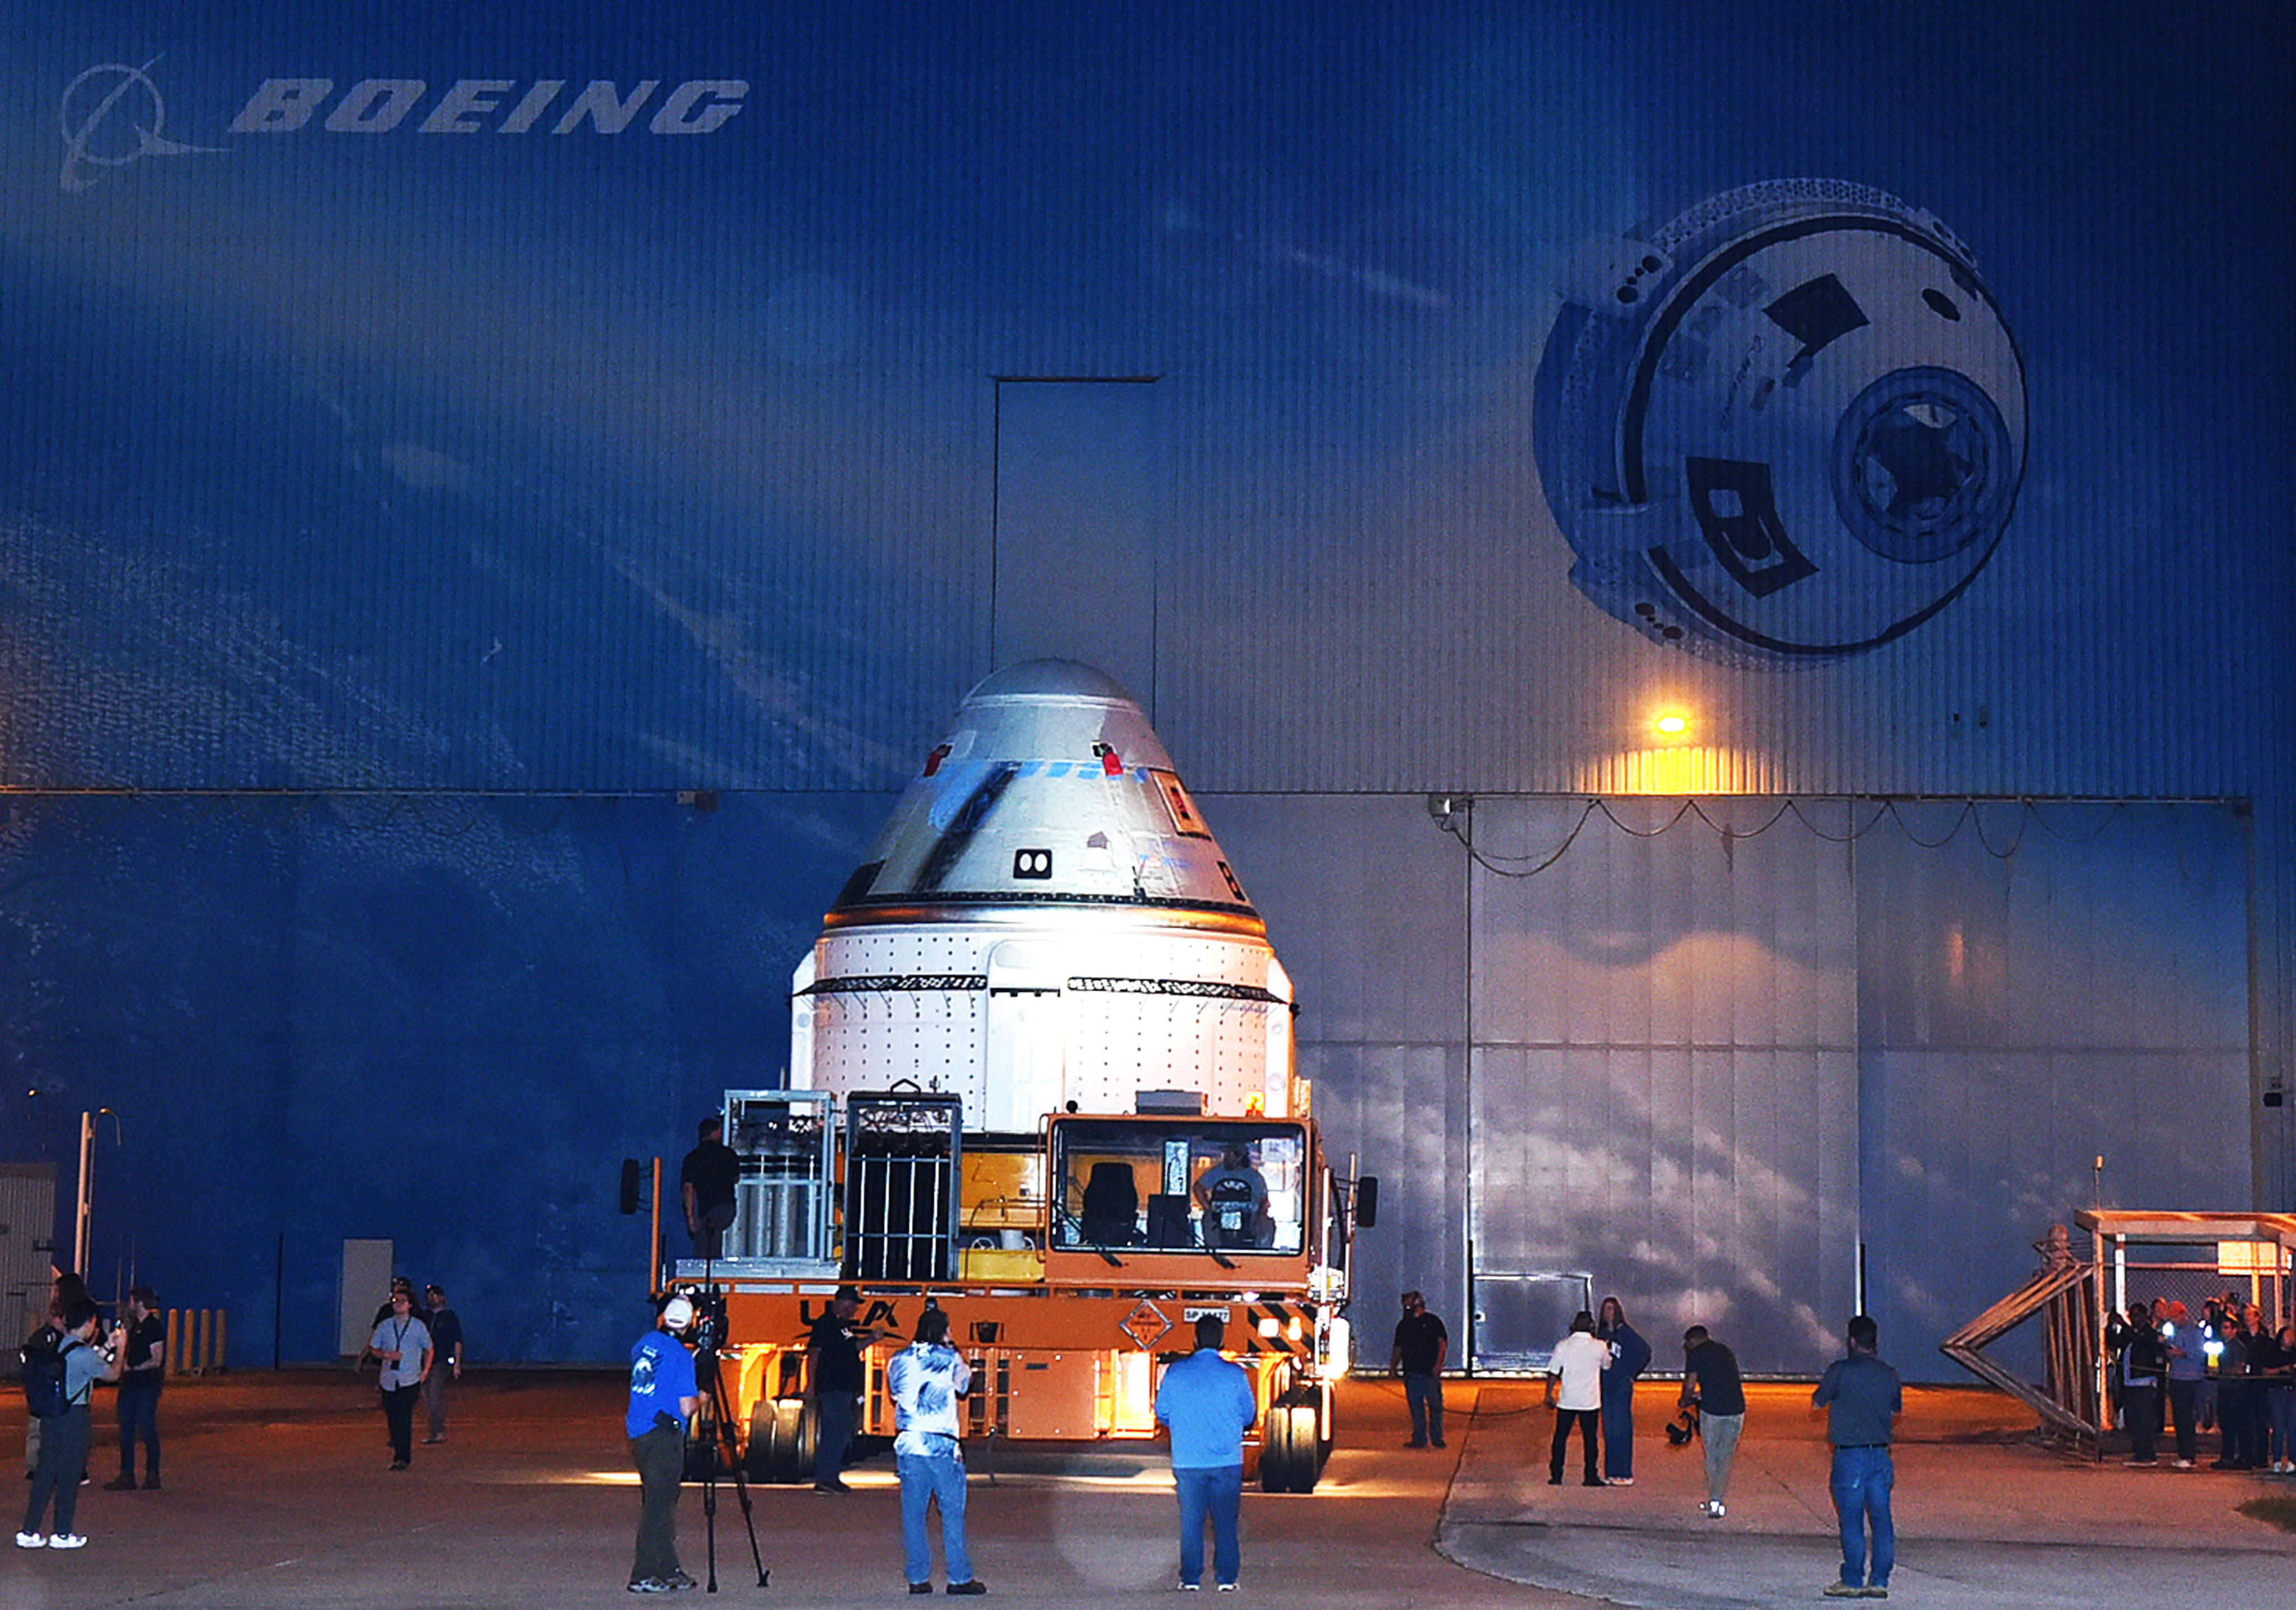 <p>Boeing's CST-100 Starliner spacecraft rolls out of the Commercial Crew and Cargo Processing Facility at the Kennedy Space Center to be transported to pad 41 at Cape Canaveral Space Force Station in Cape Canaveral, Florida, on April 16, 2024. </p><p>Starliner is scheduled for its first crewed launch to the International Space Station on a ULA Atlas V rocket with NASA astronauts Suni Williams and Butch Wilmore on May 6, 2024. </p><p>MORE: <a href="https://www.wonderwall.com/celebrity/photos/the-best-pictures-of-nasas-secret-new-x-59-plane-828970.gallery">NASA unveils new supersonic aircraft: All the best pictures</a></p>